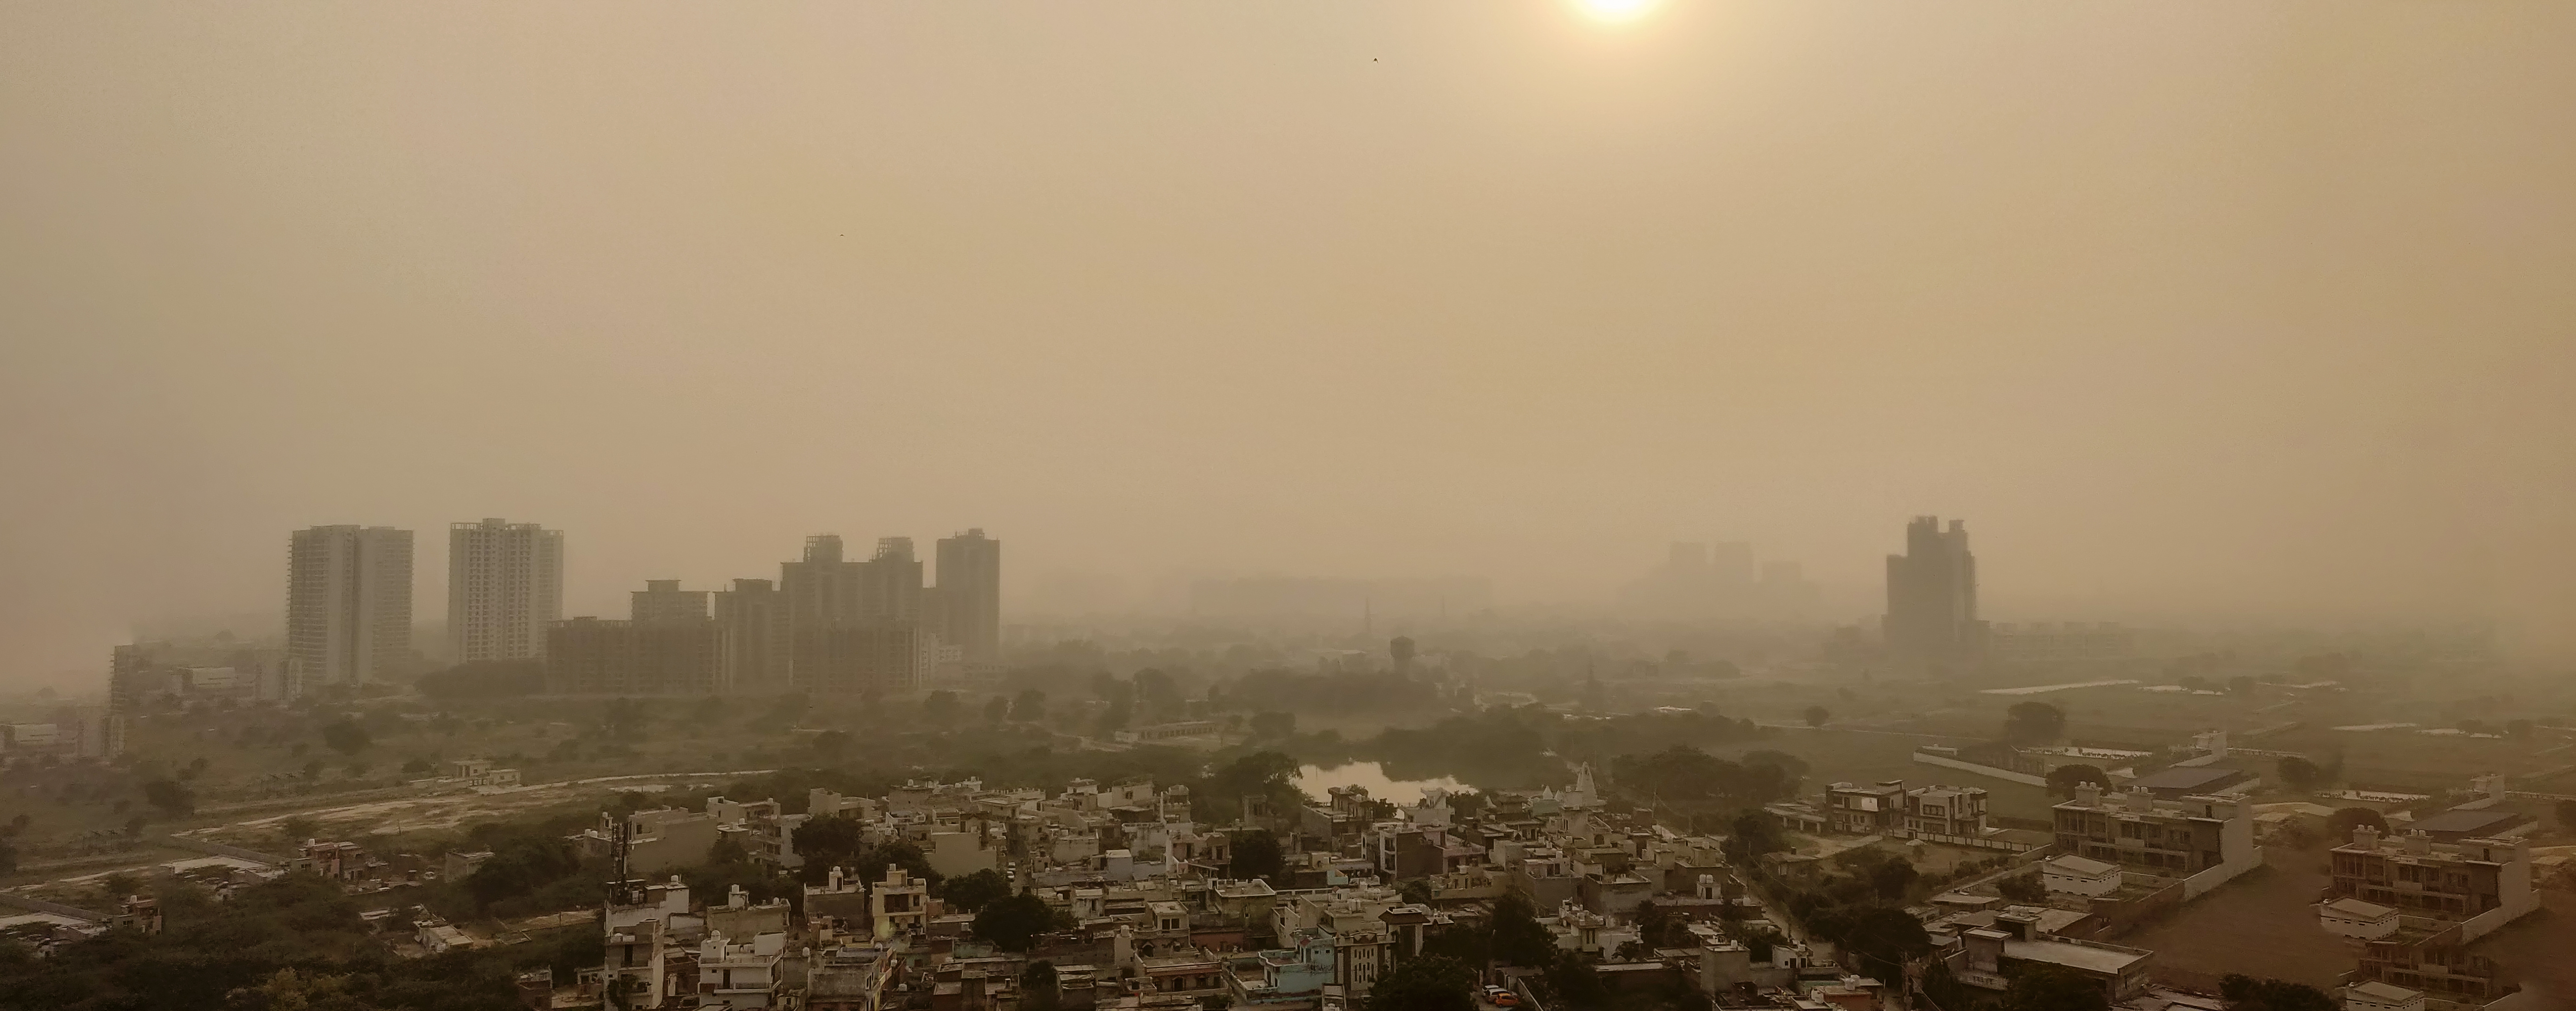 View over houses and apartment tower blocks in Delhi, India, with yellowish hazy air due to smog and pollution. Image credit: abhisheklegit | iStockphoto https://www.istockphoto.com/photo/delhi-air-pollution-gm1126605395-296668246